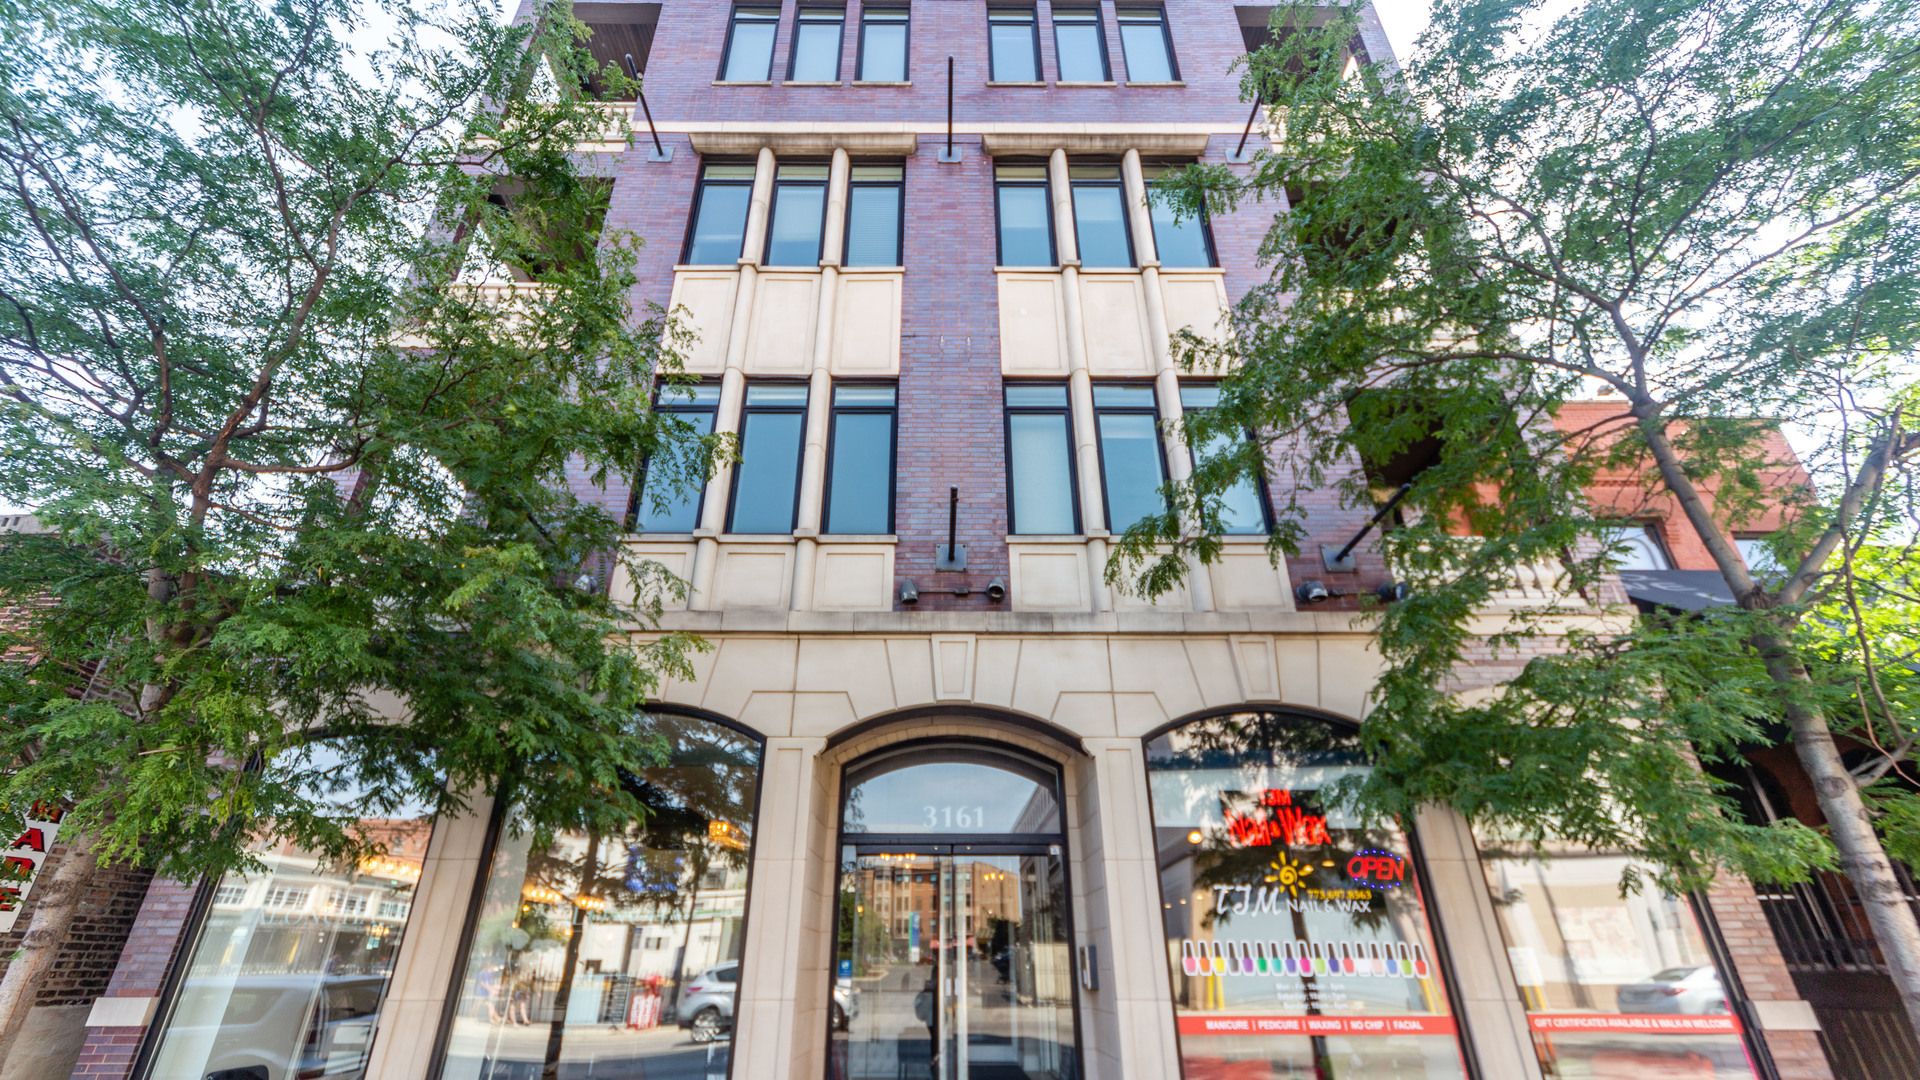 Main Photo: 3161 N Halsted Street Unit 201 in Chicago: CHI - Lake View Residential for sale ()  : MLS®# 11330322